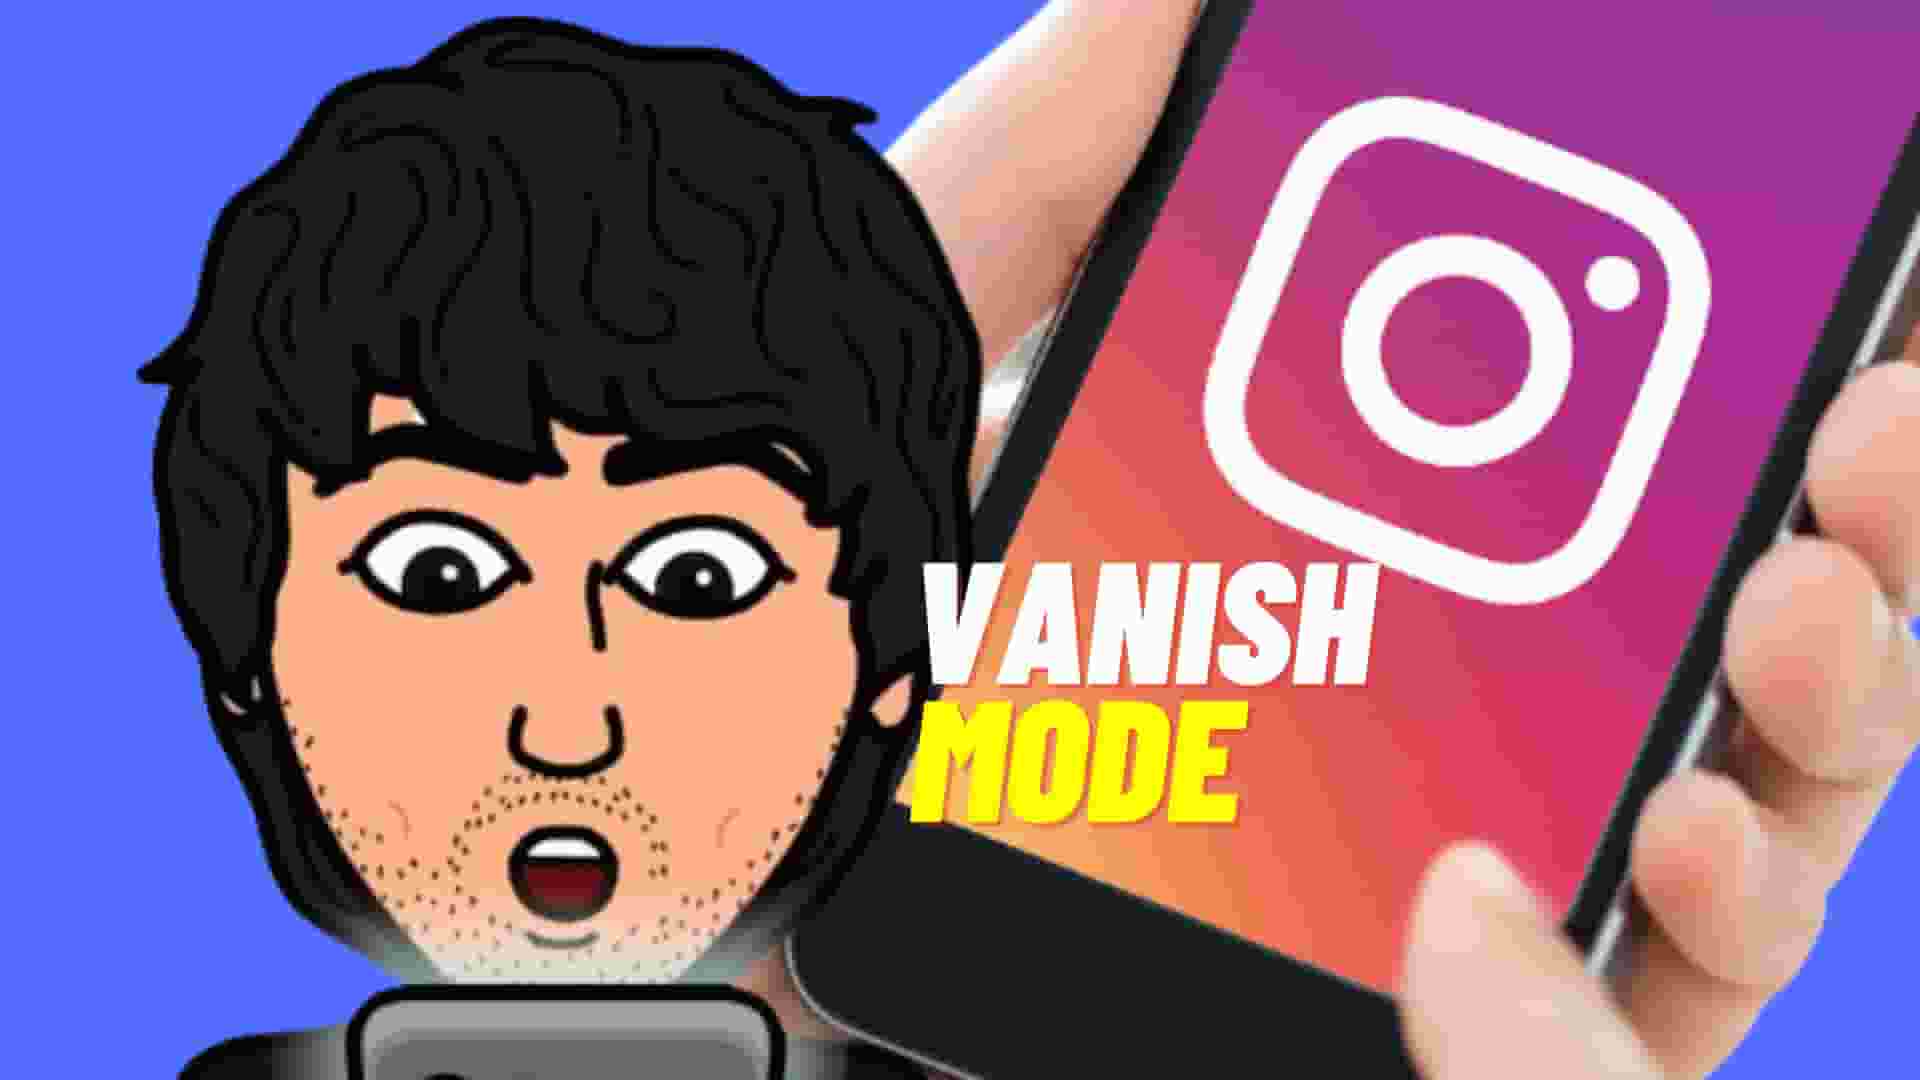 Instagram vanish mode: how to enable or disable in easy steps